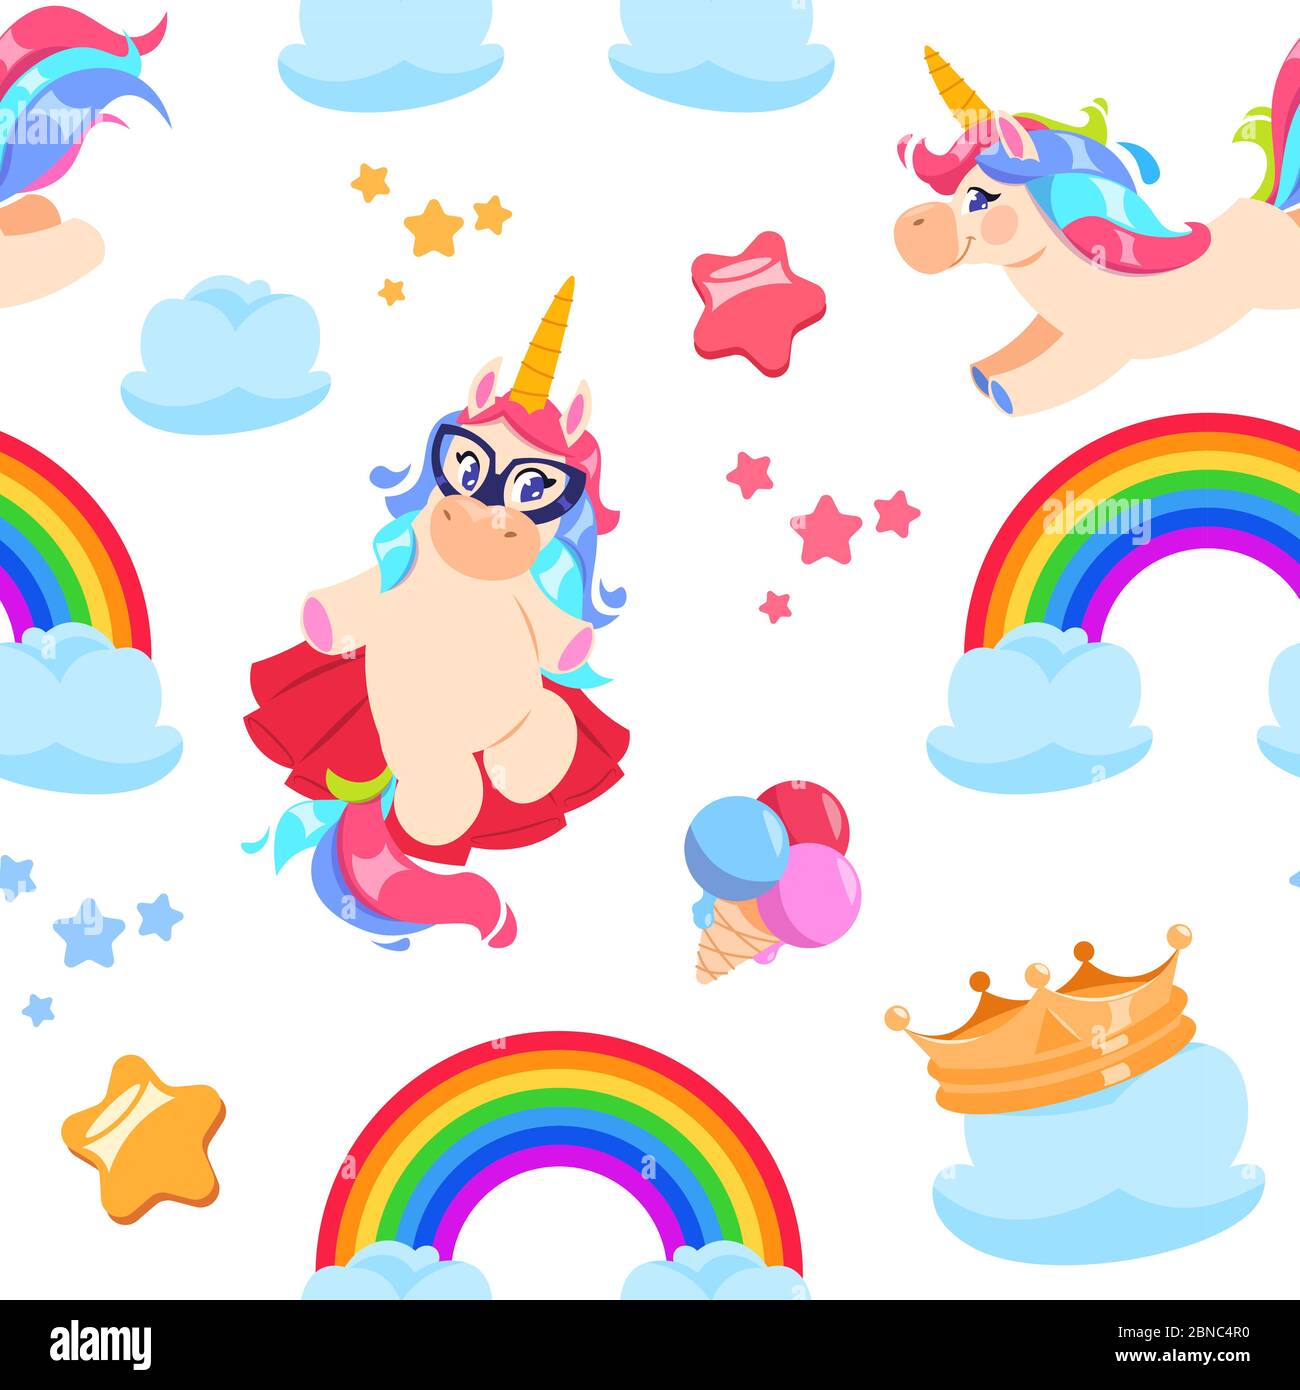 Cute unicorn seamless pattern. Baby pony, rainbow horse. Girl bedroom fairytale vector wallpaper. Illustration of unicorn and pony with rainbow and clouds Stock Vector